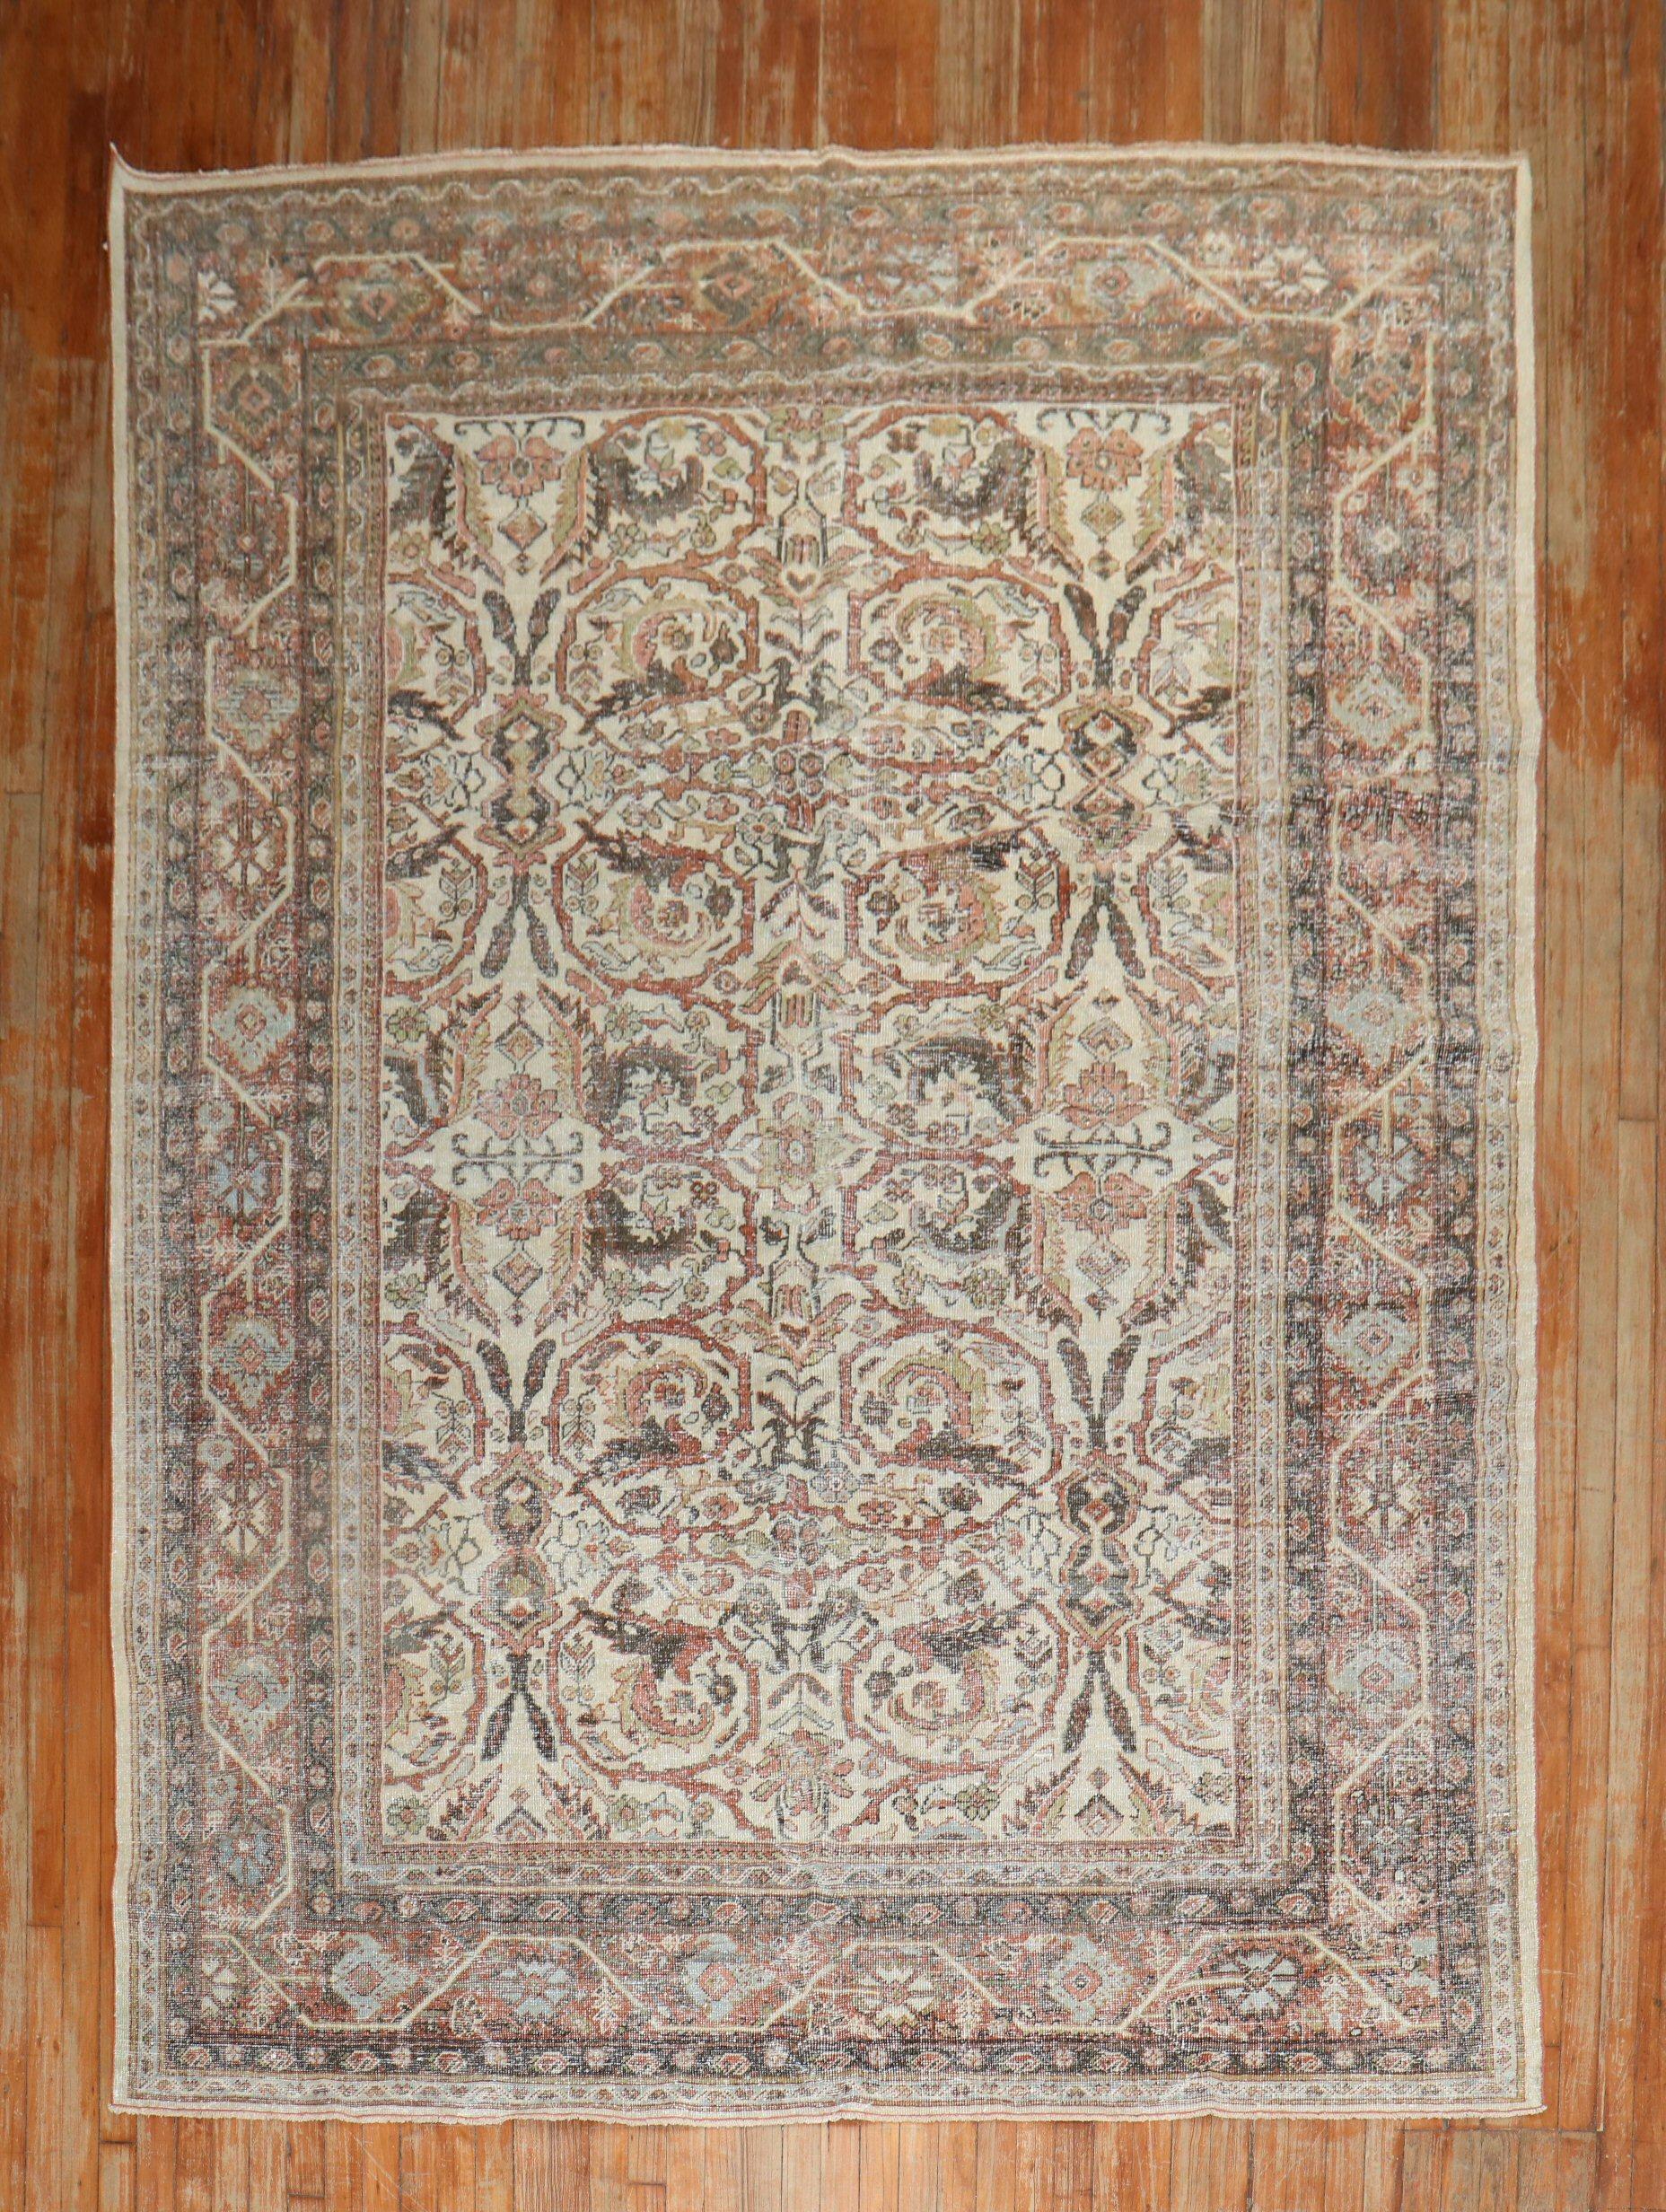 A one-of-a-kind Persian Mahal worn rug featuring an ivory ground with a bold, masculine pattern from the 1st quarter of the 20th century

7' x 10'2